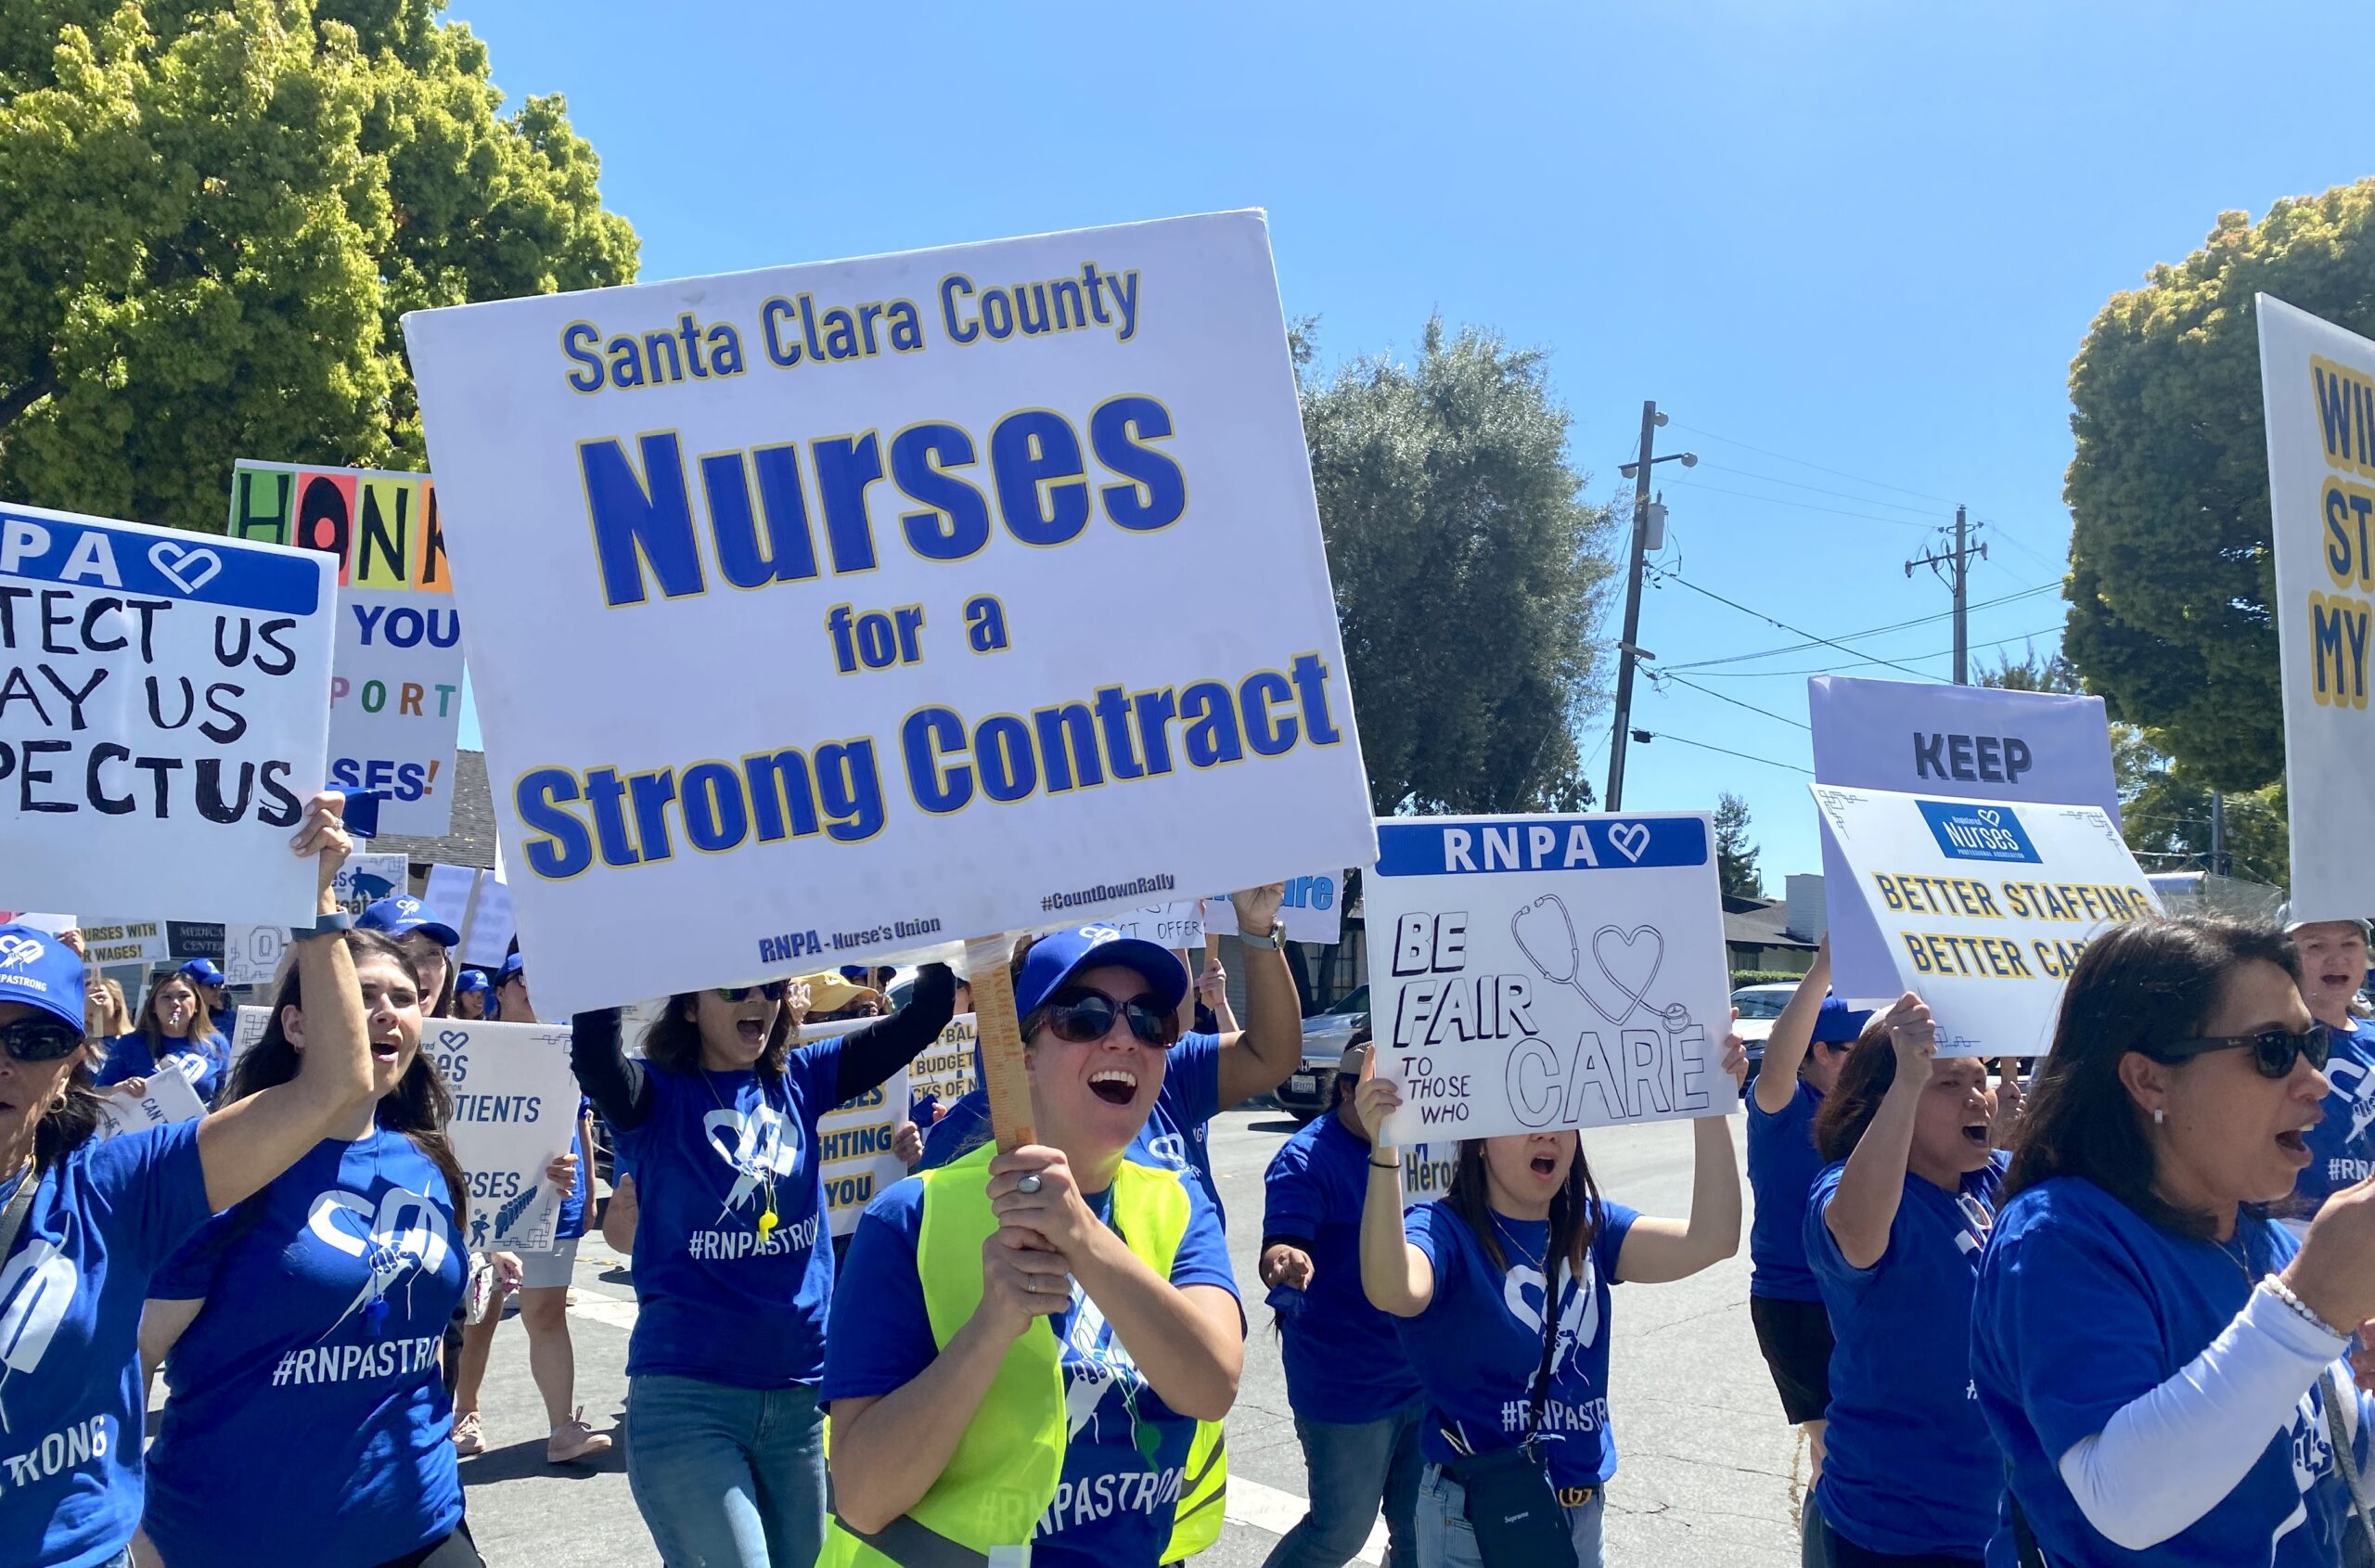 Nurses from Santa Clara Valley Healthcare are on strike while the county spends over $20 million on contract nurses